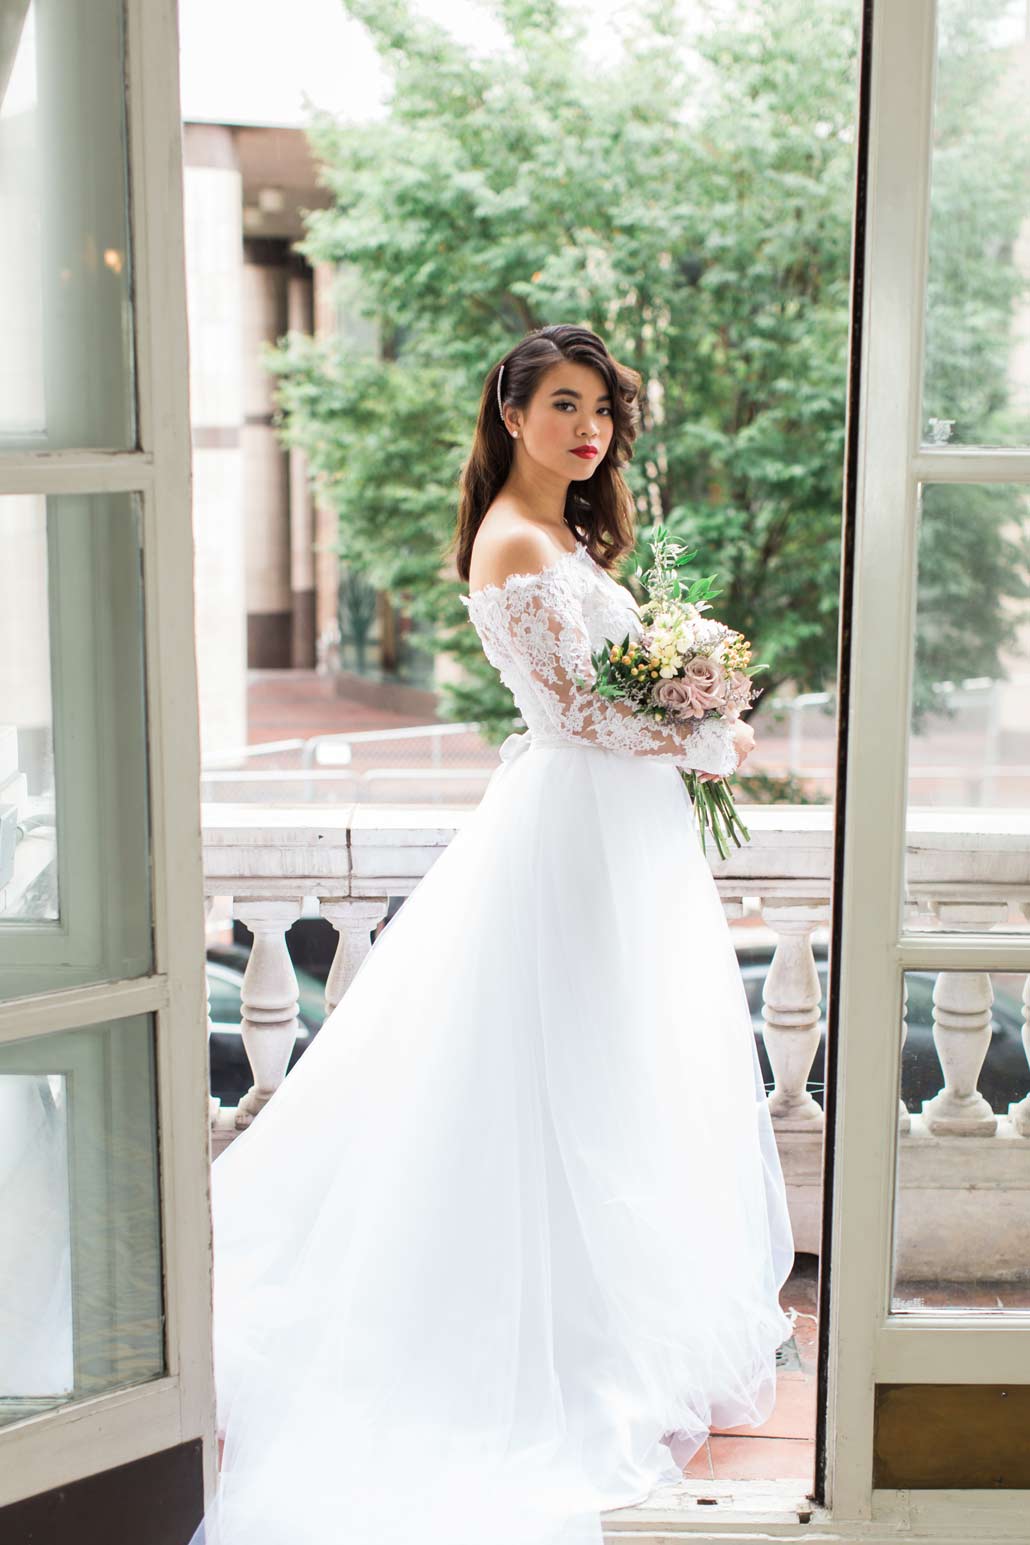 How to Choose a Colorful Wedding Dress | Angela Kim Couture